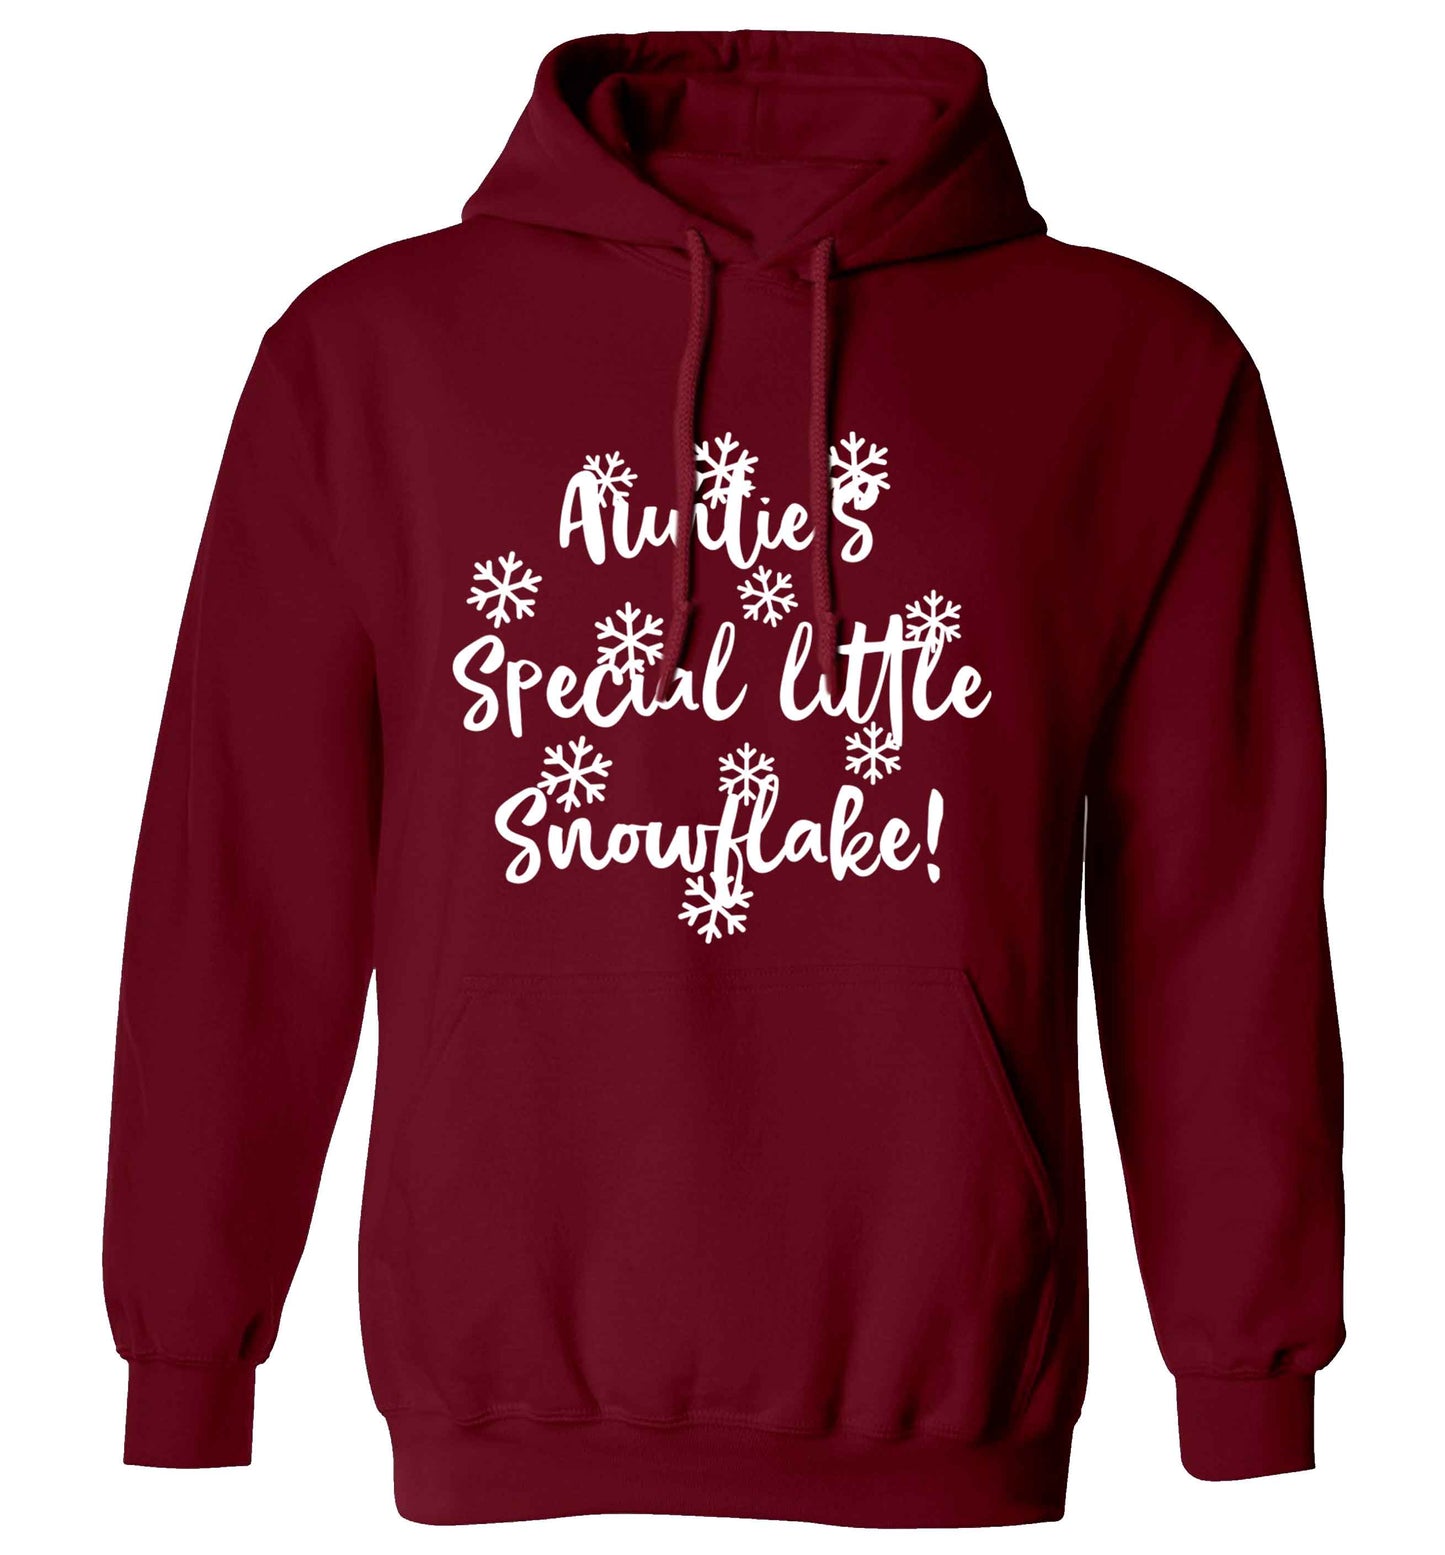 Auntie's special little snowflake adults unisex maroon hoodie 2XL